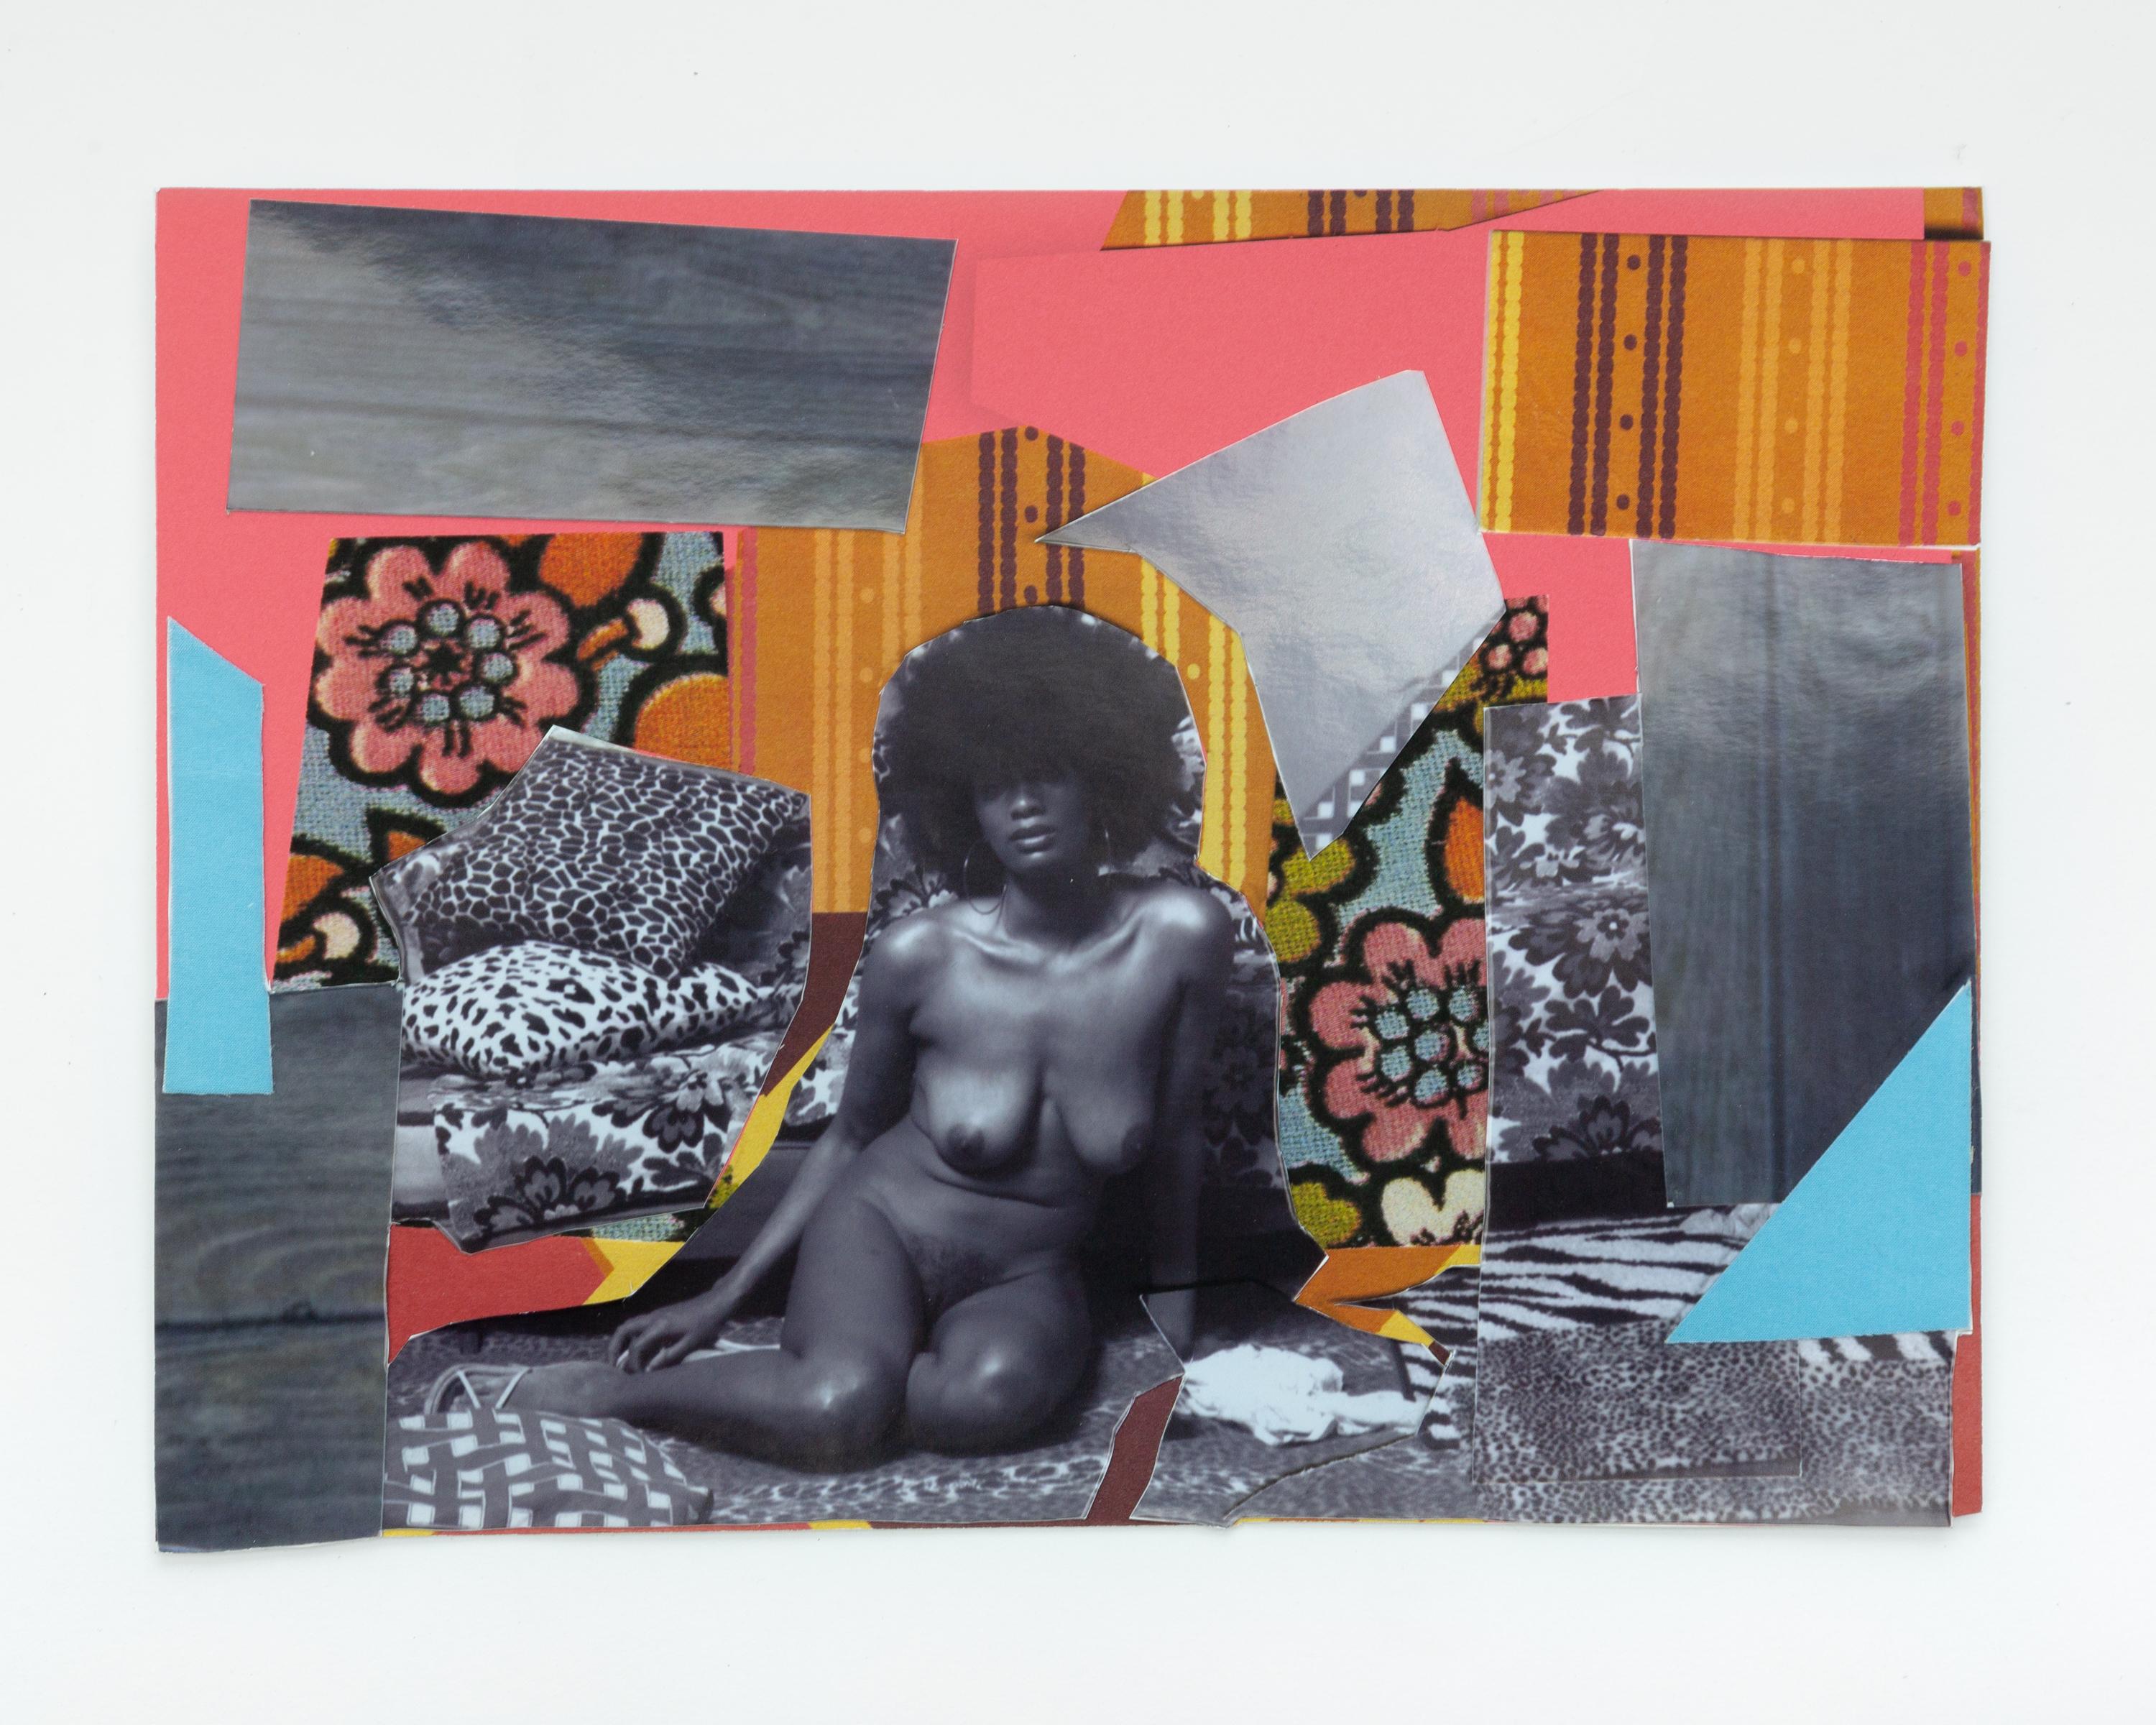 The new exclusive series of limited edition collages by acclaimed American artist Mickalene Thomas comes in two series of 10 unique collage prints.

Phaidon, Artspace, and Avant Arte are proud to announce the global launch of two exclusive